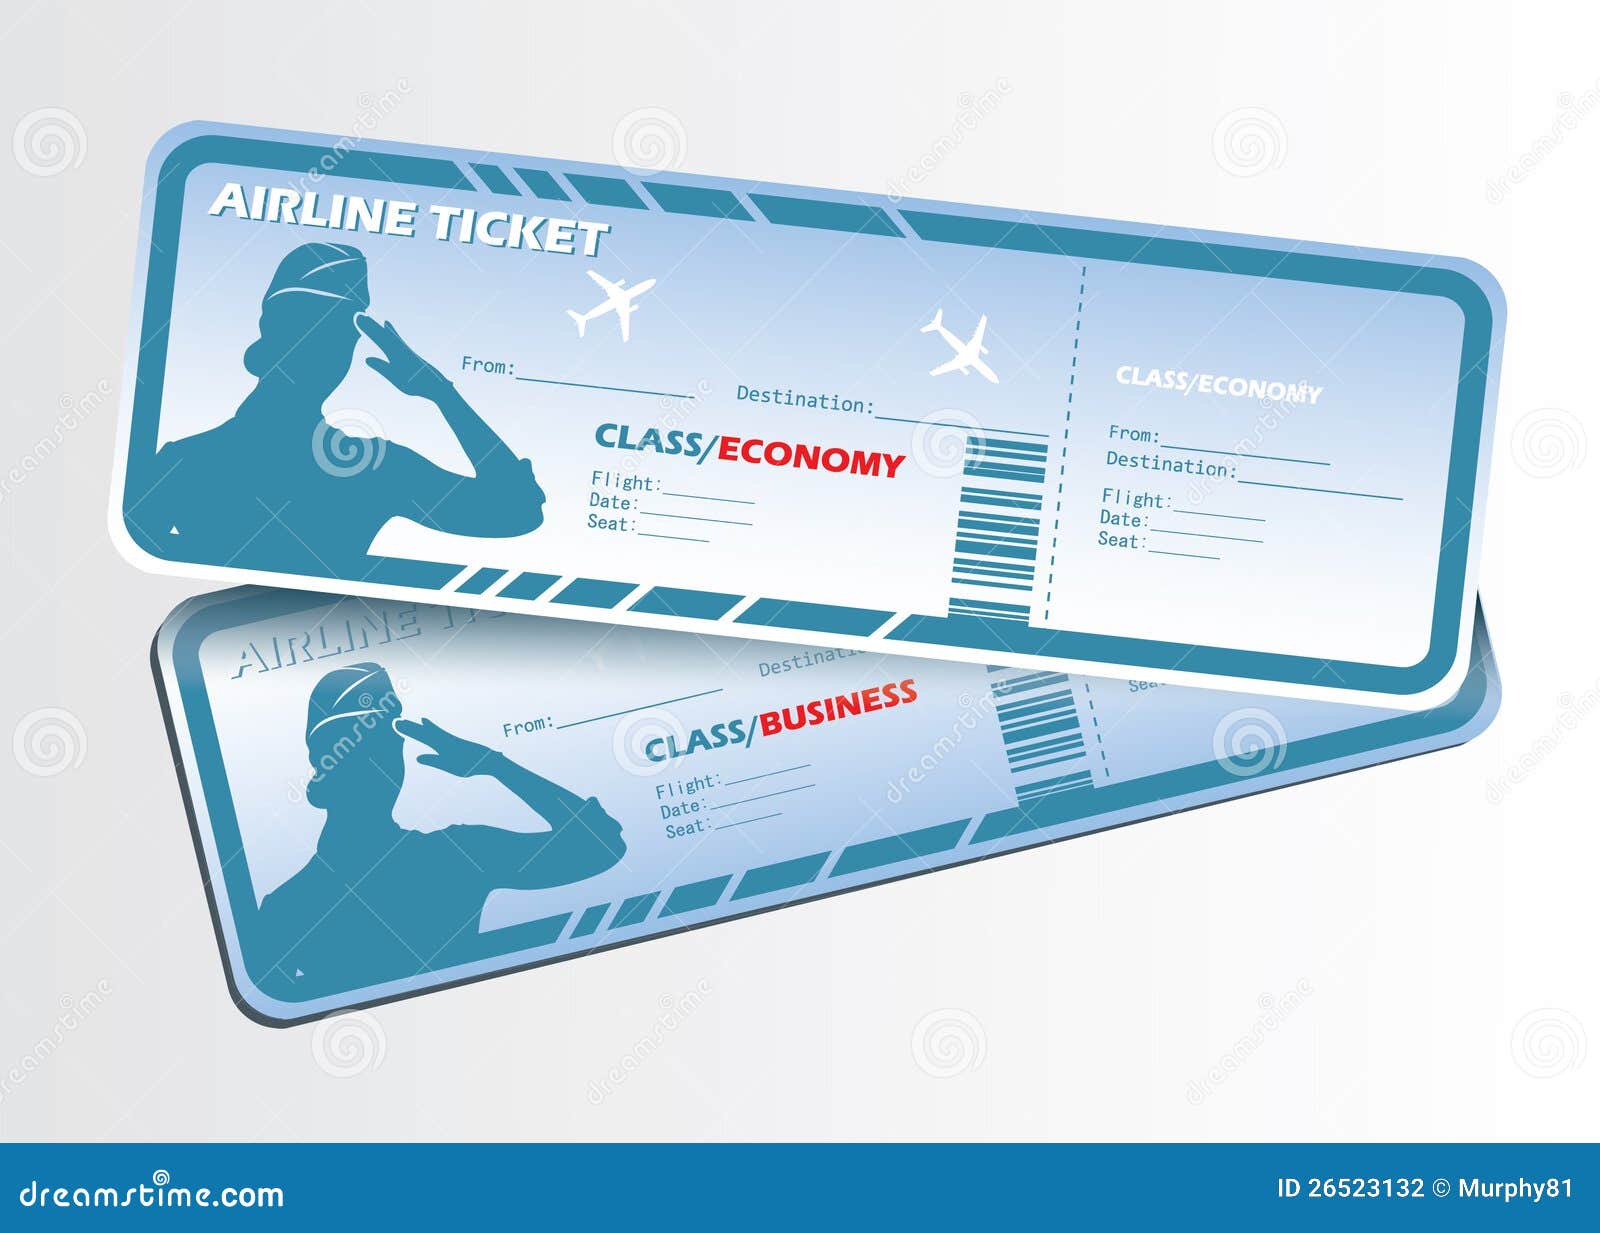 clipart airplane ticket - photo #21